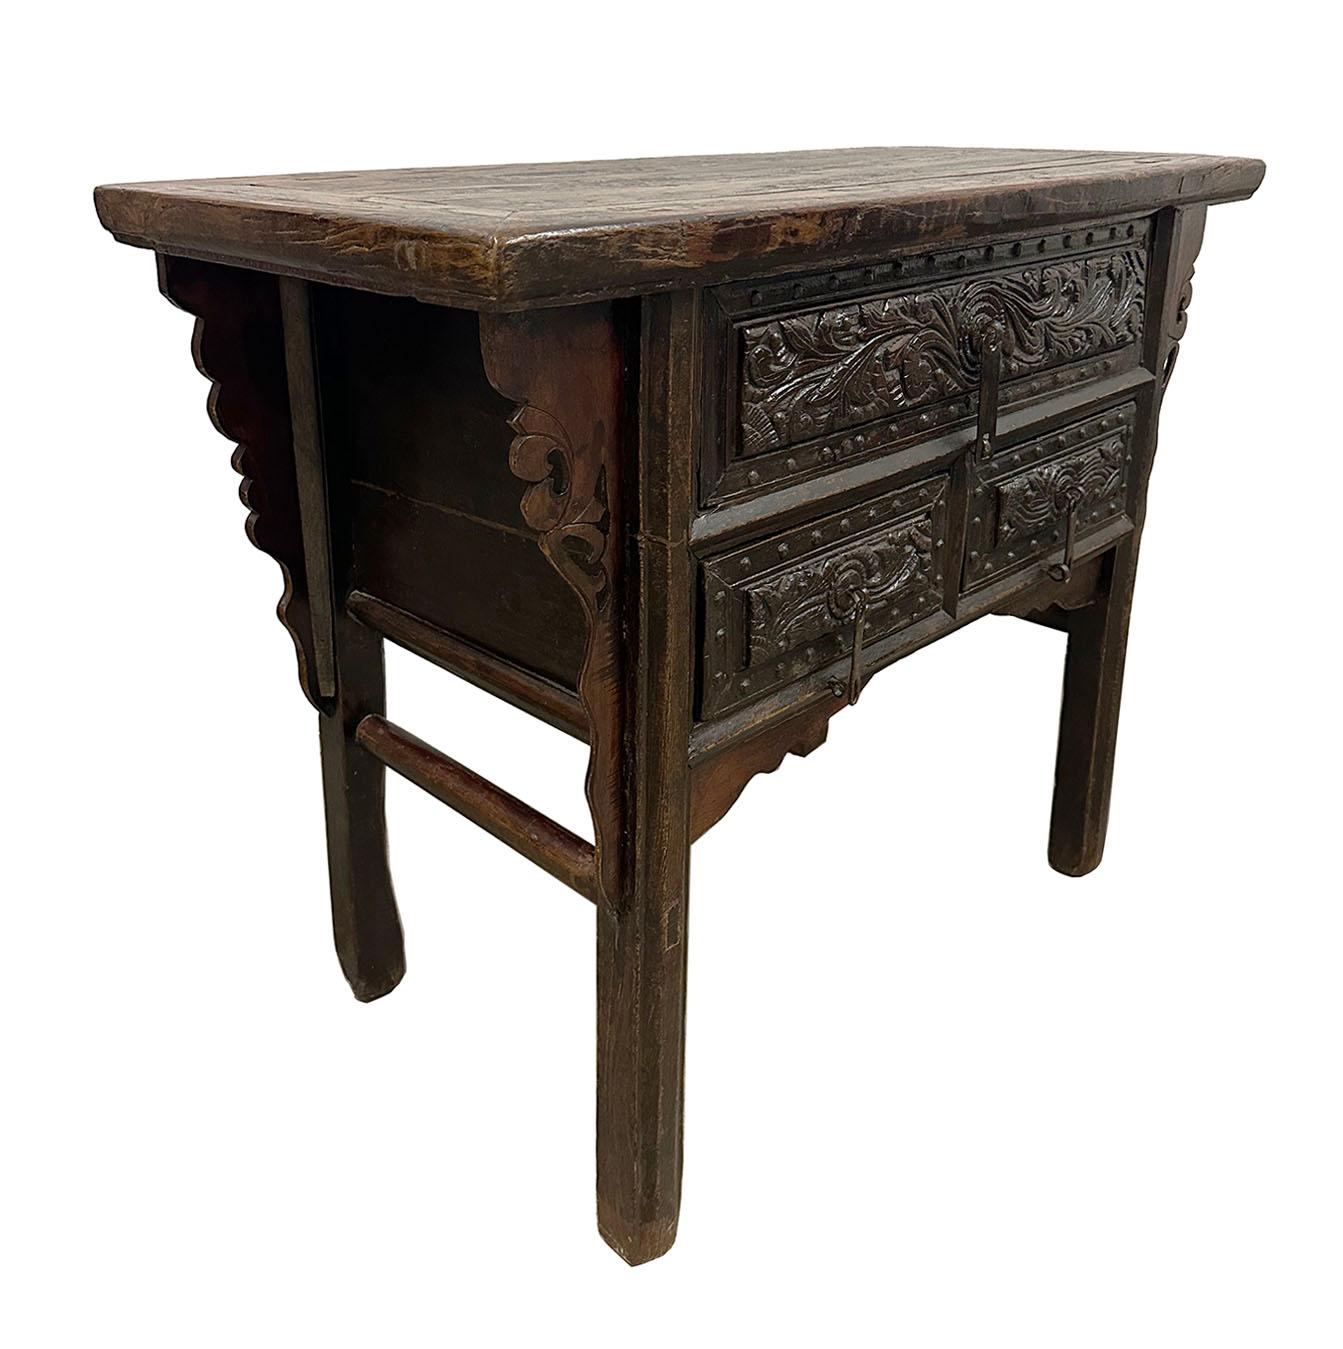 This beautiful antique carved Shan Xi console table has beautiful traditional detailed deep/raised carving works on the front drawers panel and legs. This console table features 1 large drawer on the top and 2 smaller drawers underneath. All drawers